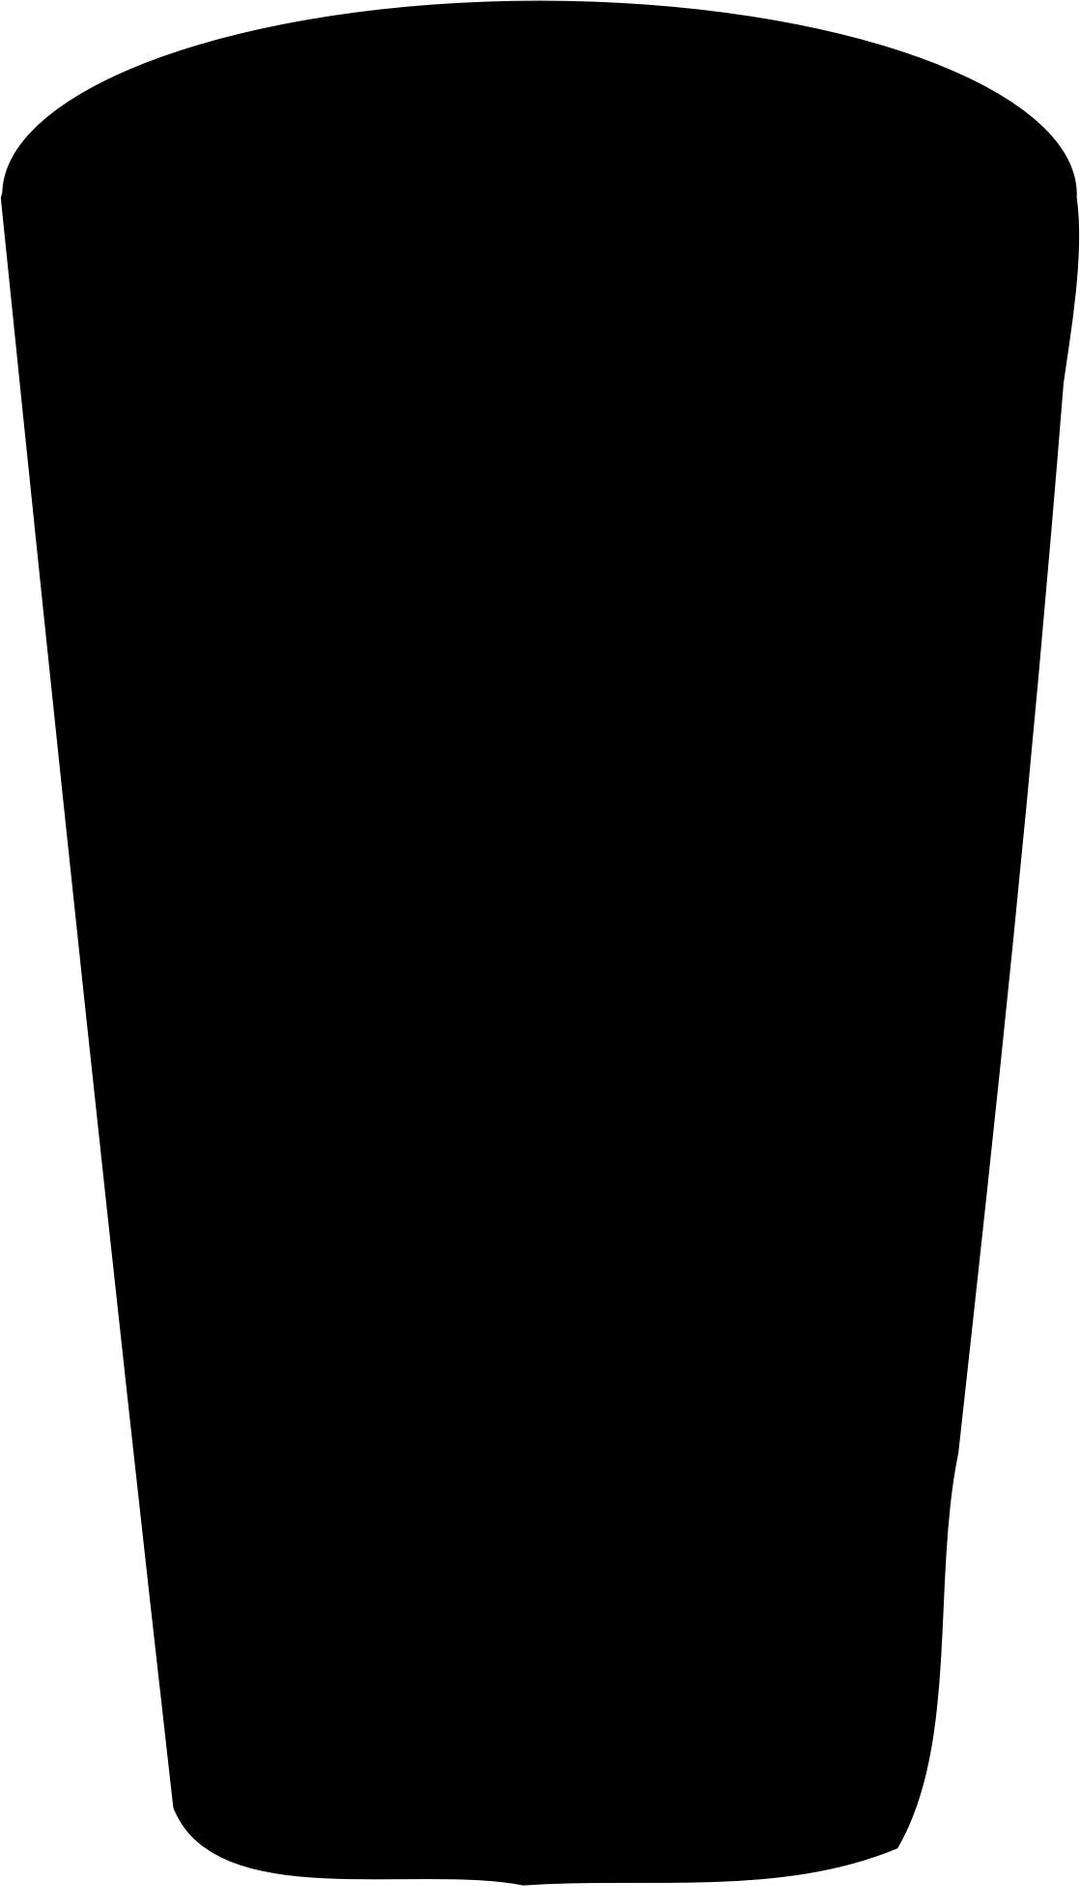 A Pint of Stout Beer 1 png transparent